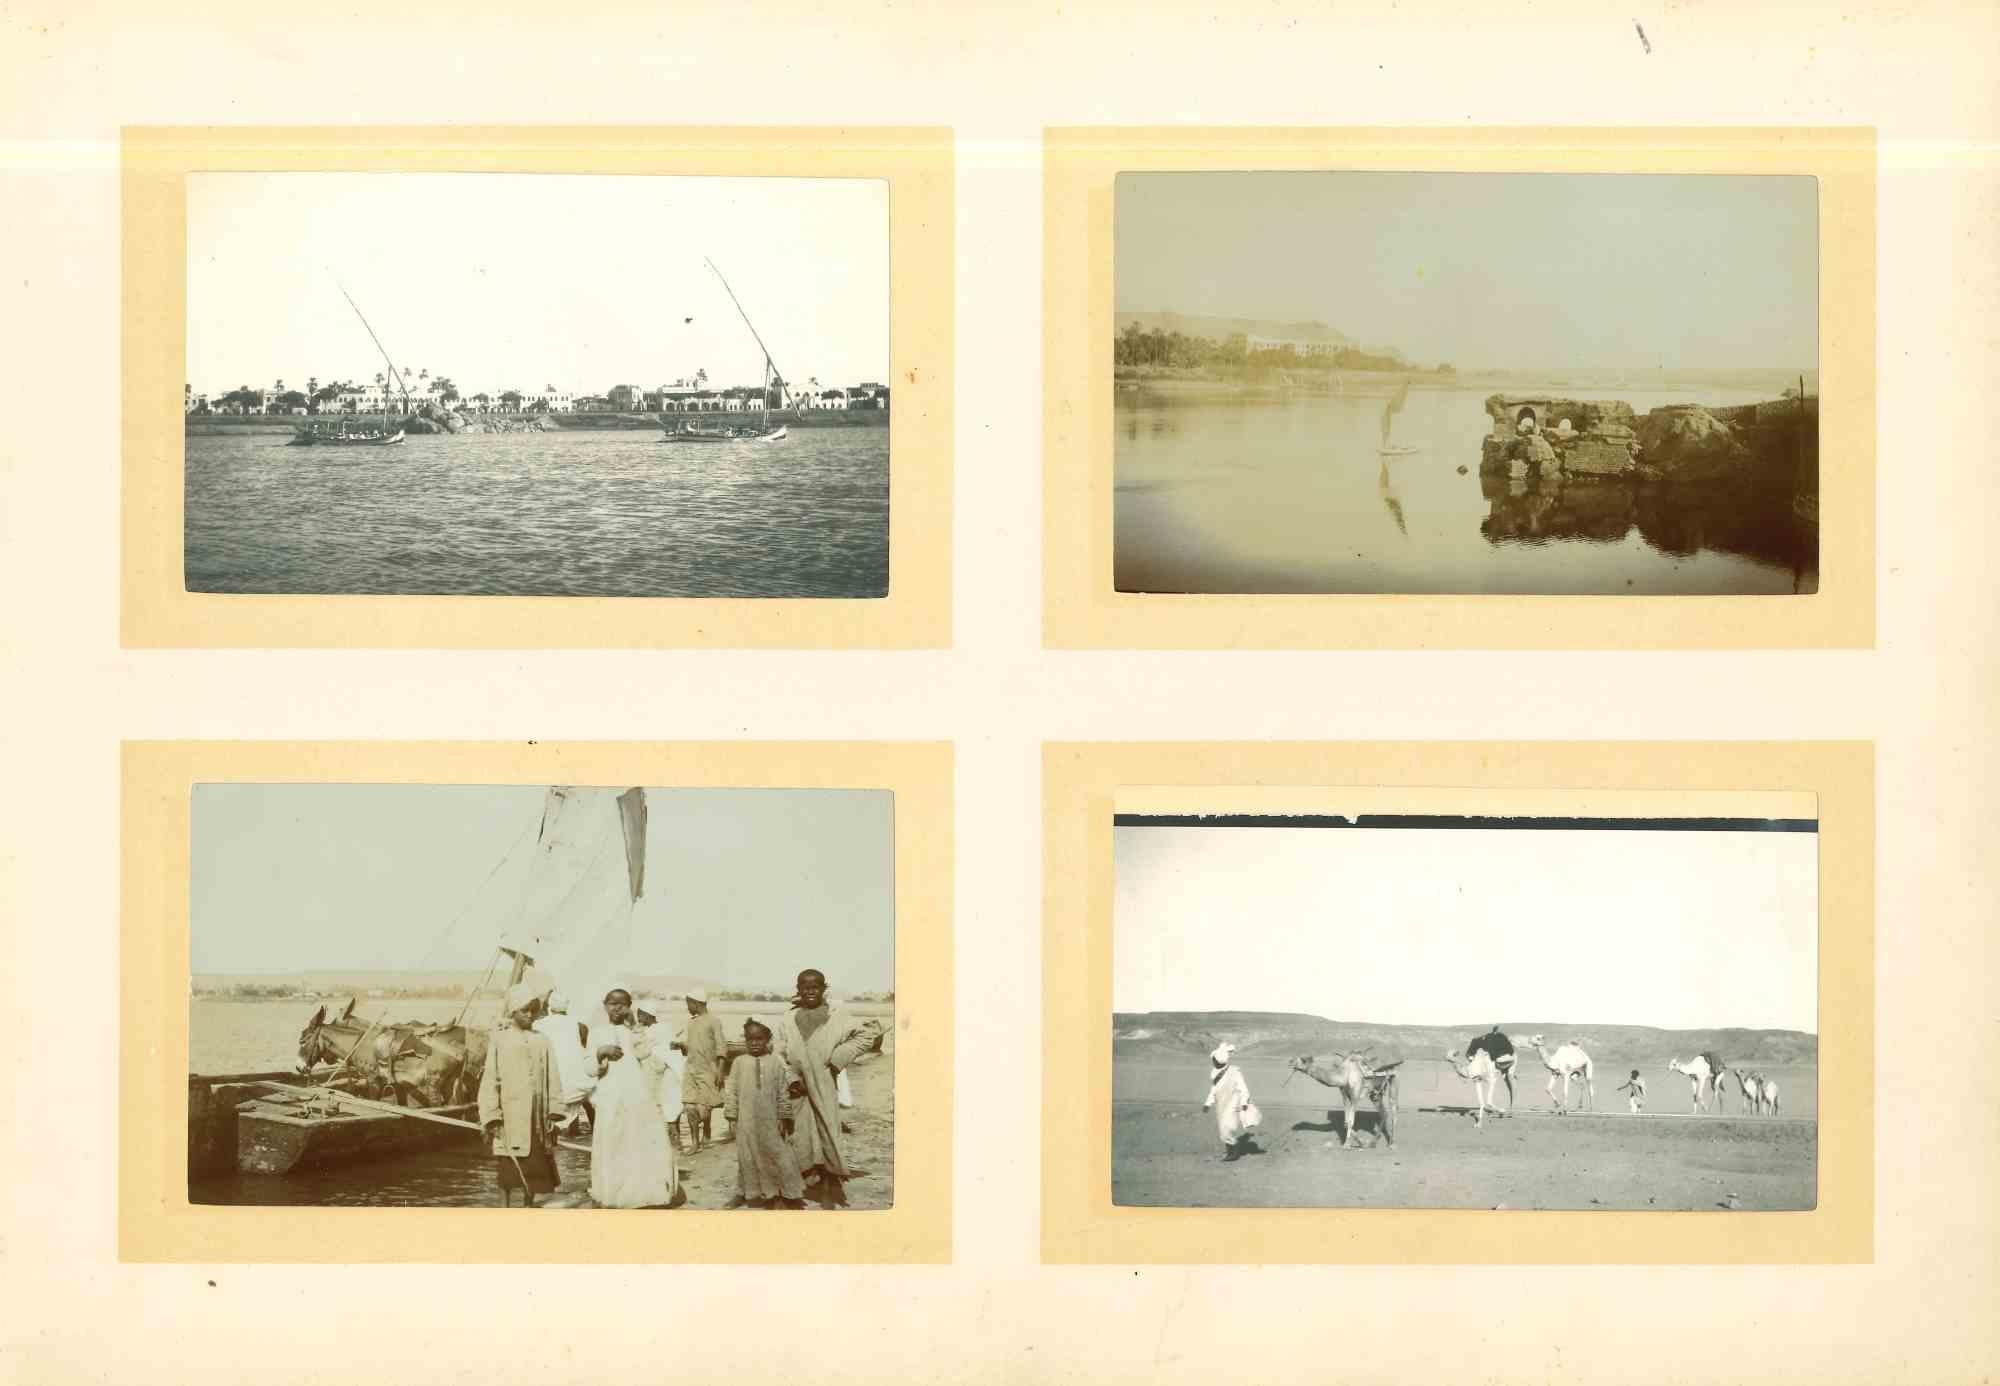 Unknown Figurative Photograph - Landscape in Northern Africa - Vintage Photograph - Early 20th Century